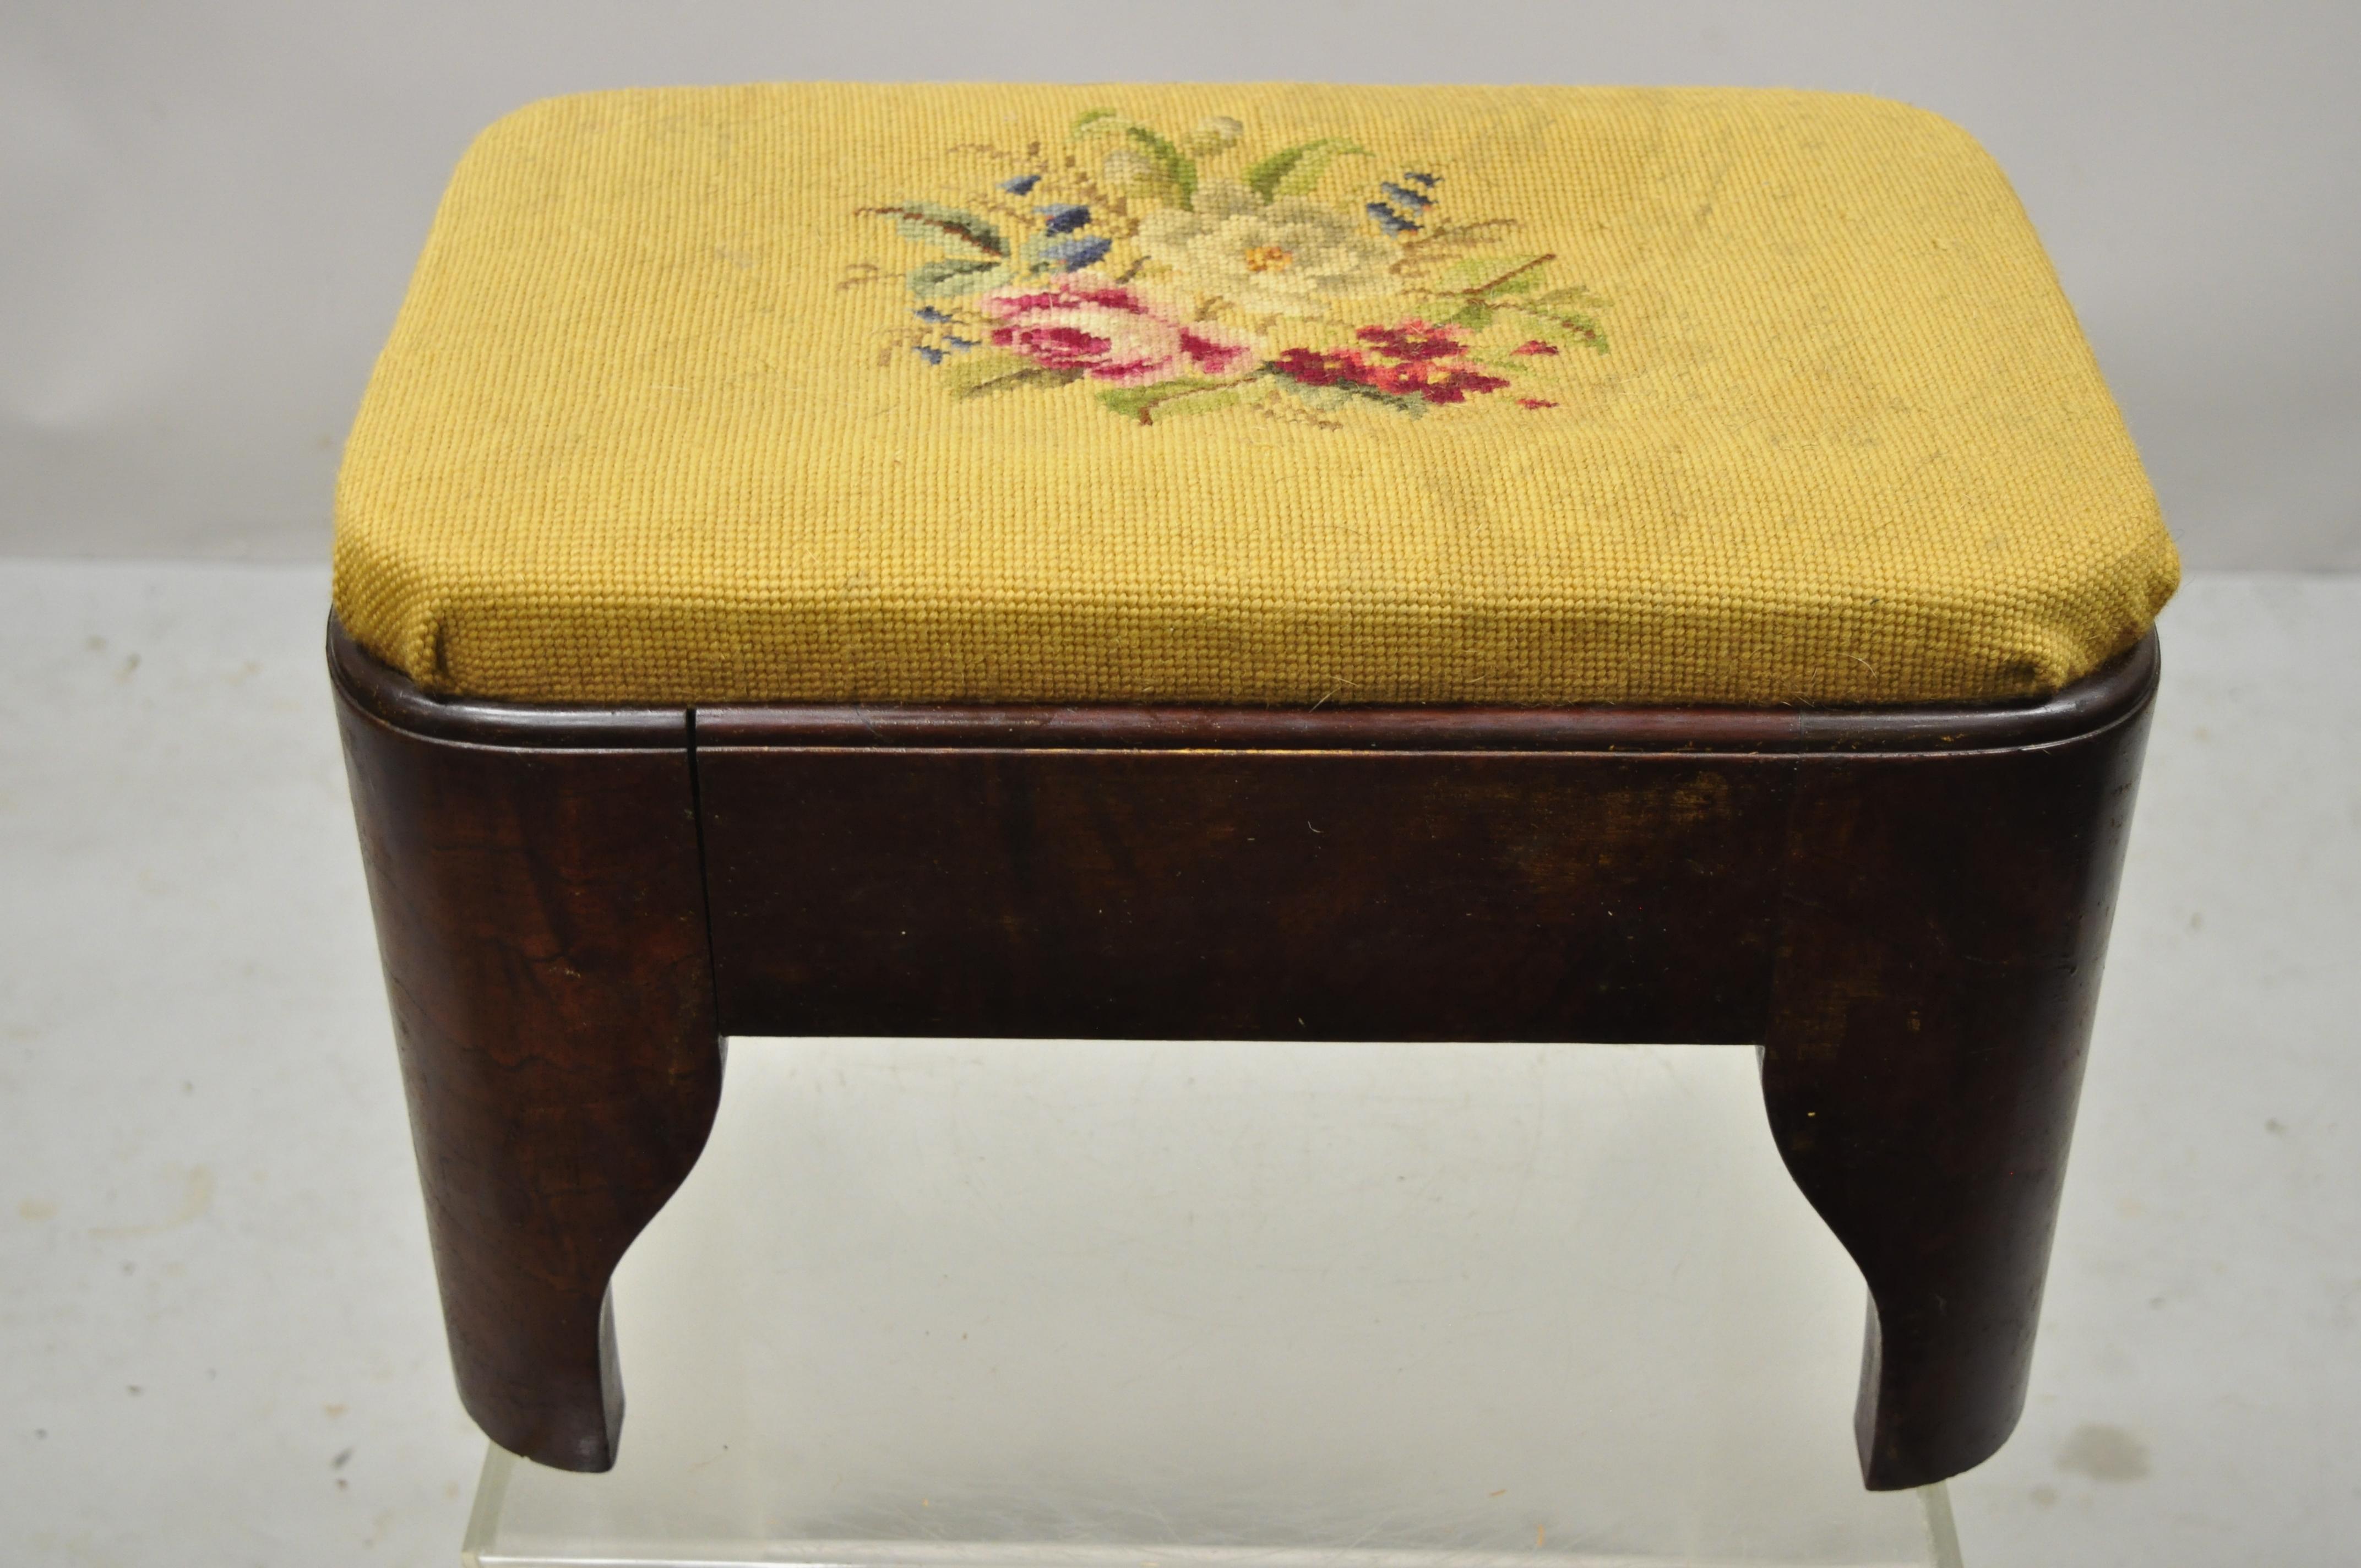 Antique Victorian Empire crotch mahogany floral needlepoint footstool ottoman. Item features beautiful wood grain, very nice antique, great style and form. Circa 19th century. Measurements: 11